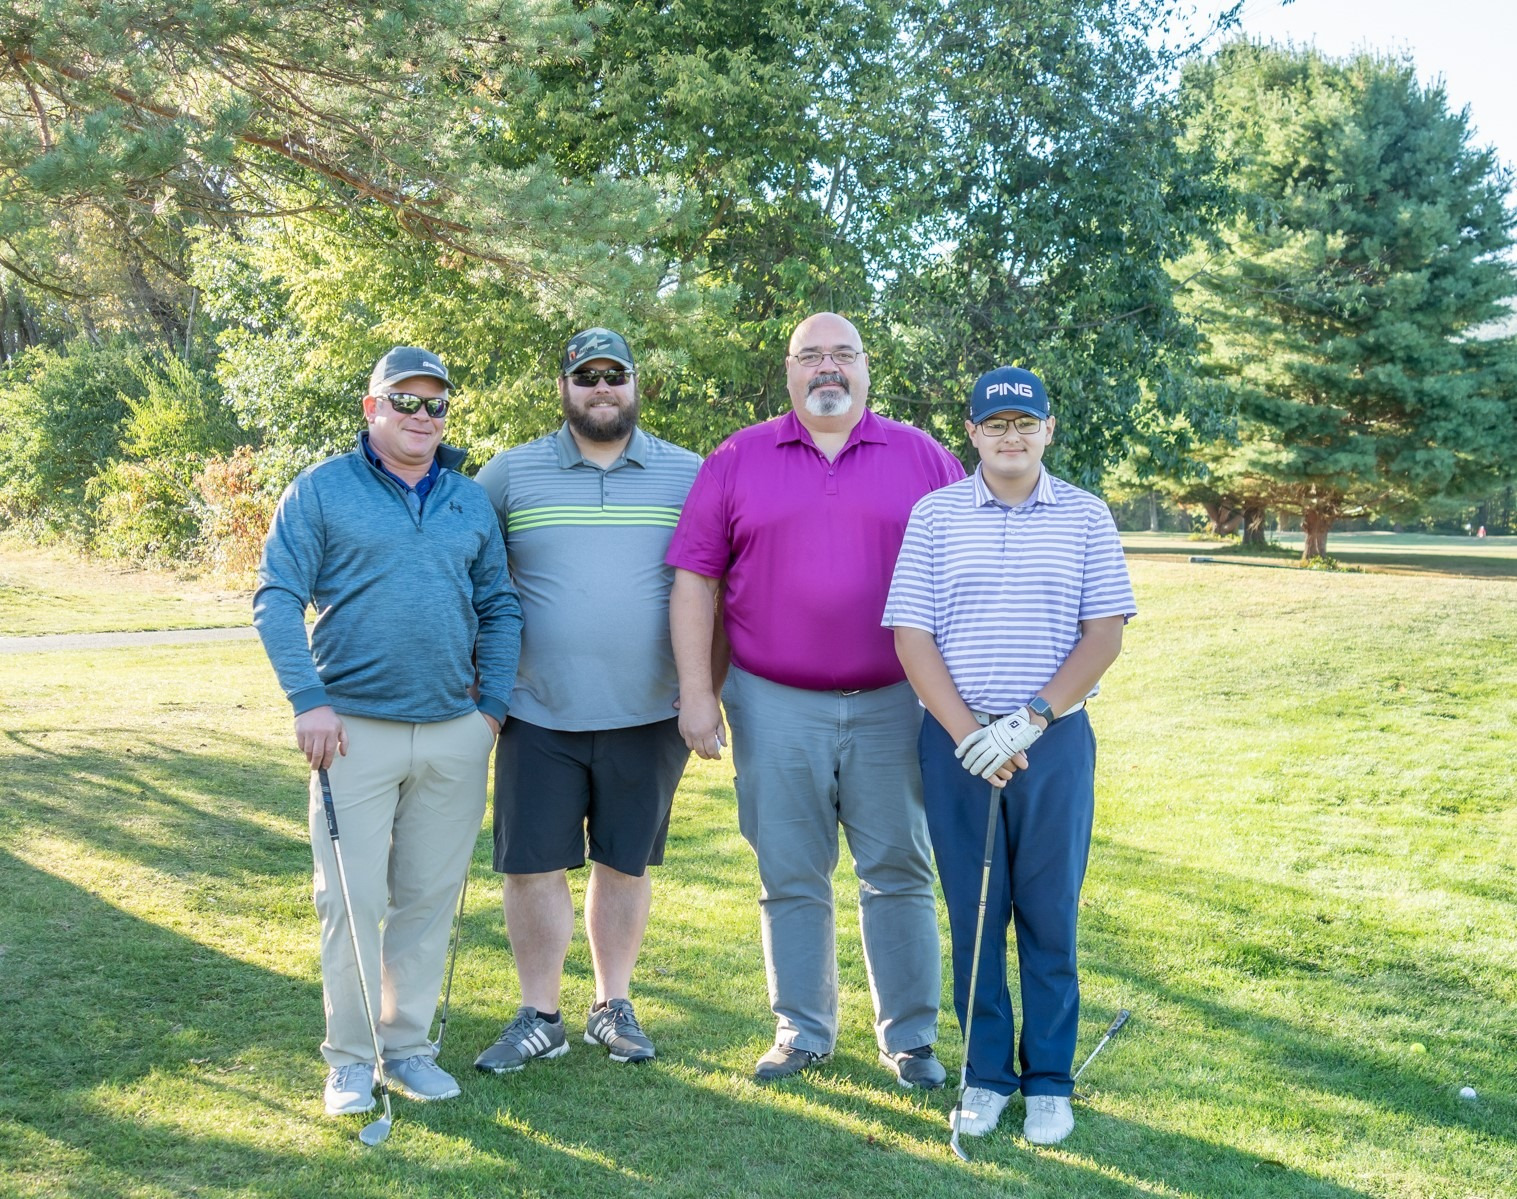 WPES was proud to be a SILVER SPONSOR in the Dwell Orphan Care golf fundraiser which raised just over $16,000!